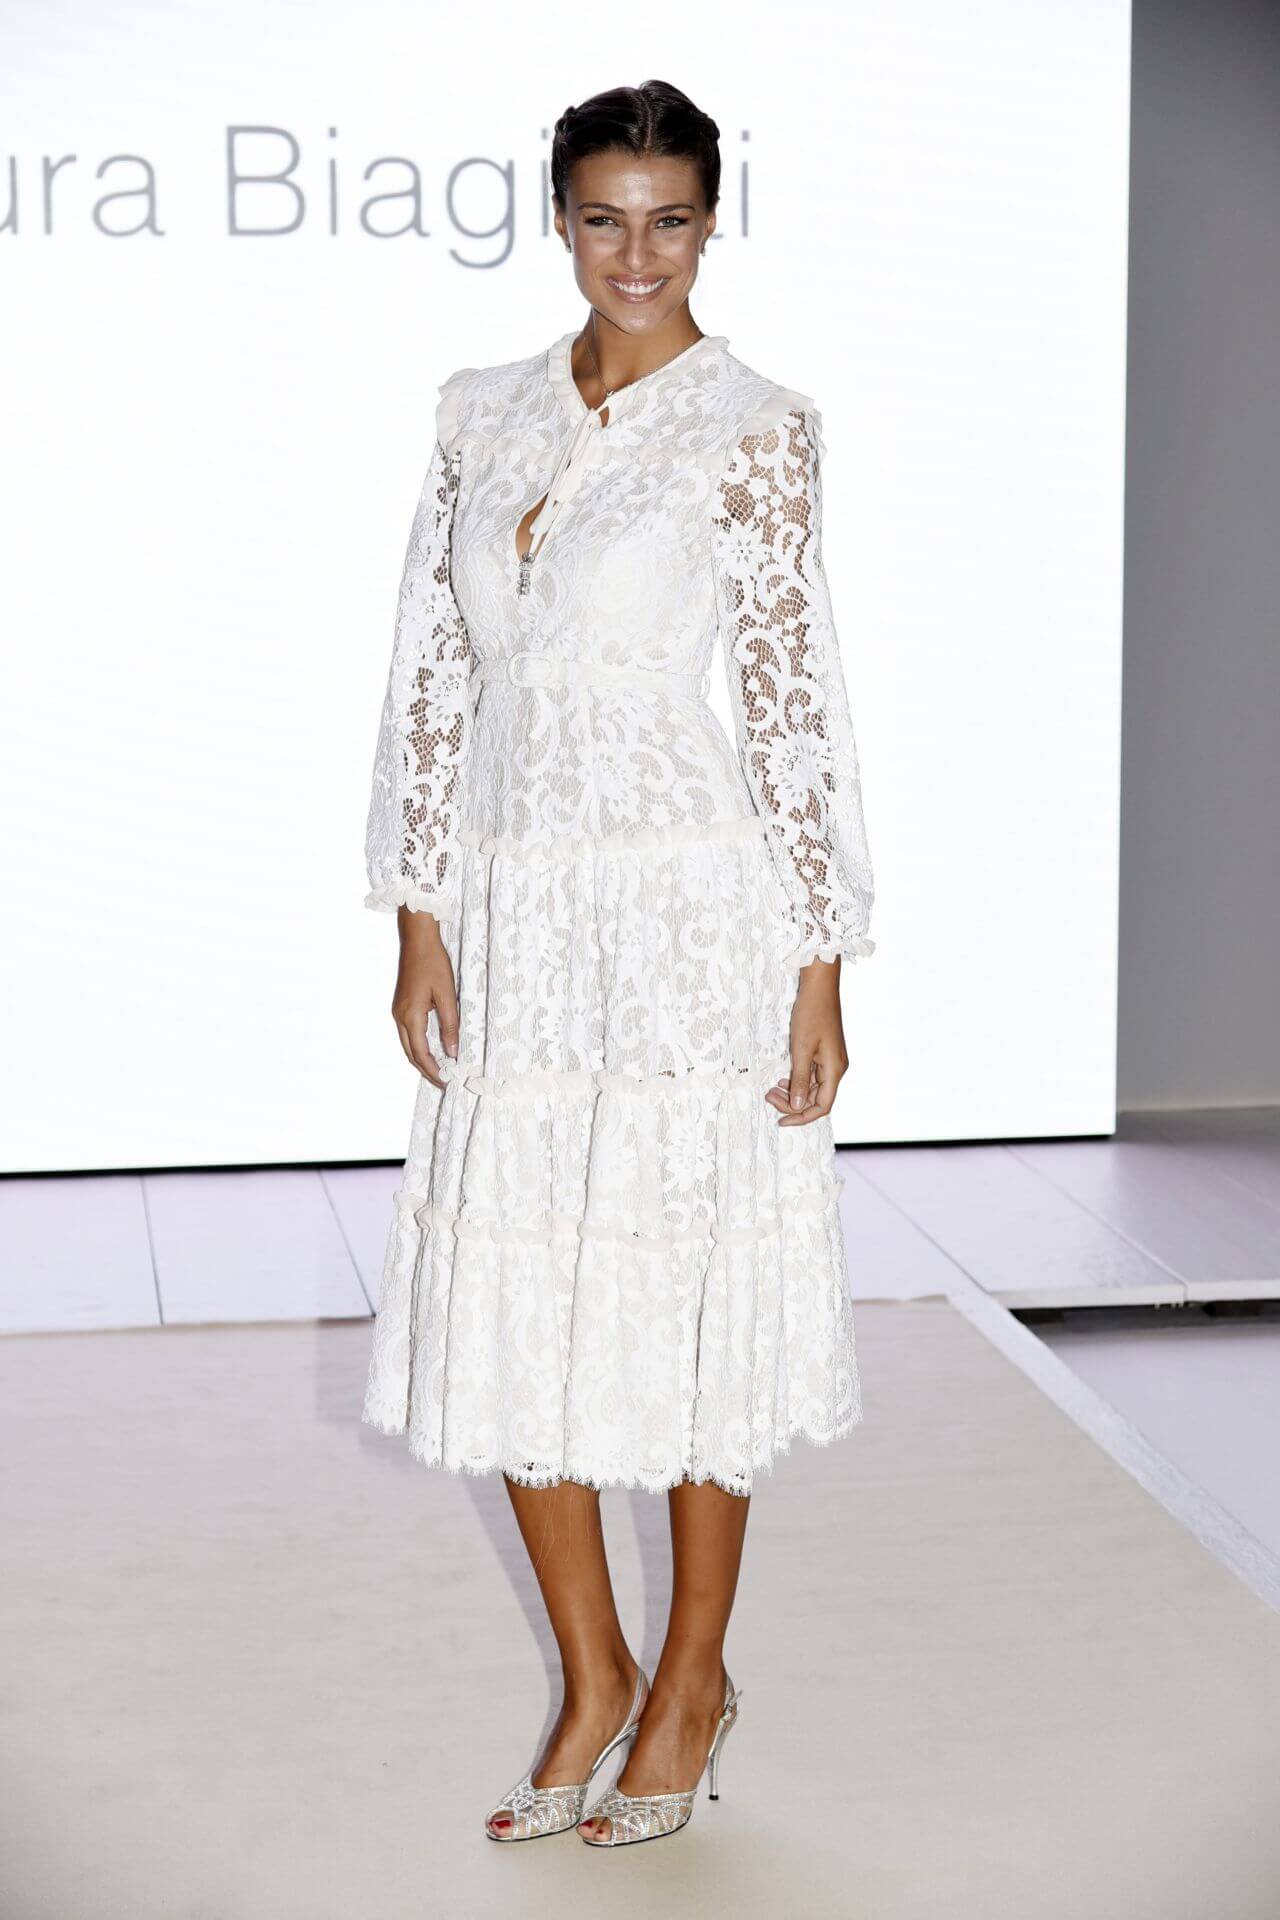 Cristina Chiabotto  In White Lace Design Full Sleeves Layered Gown Dress At Laura Biagiotti Show in Milan